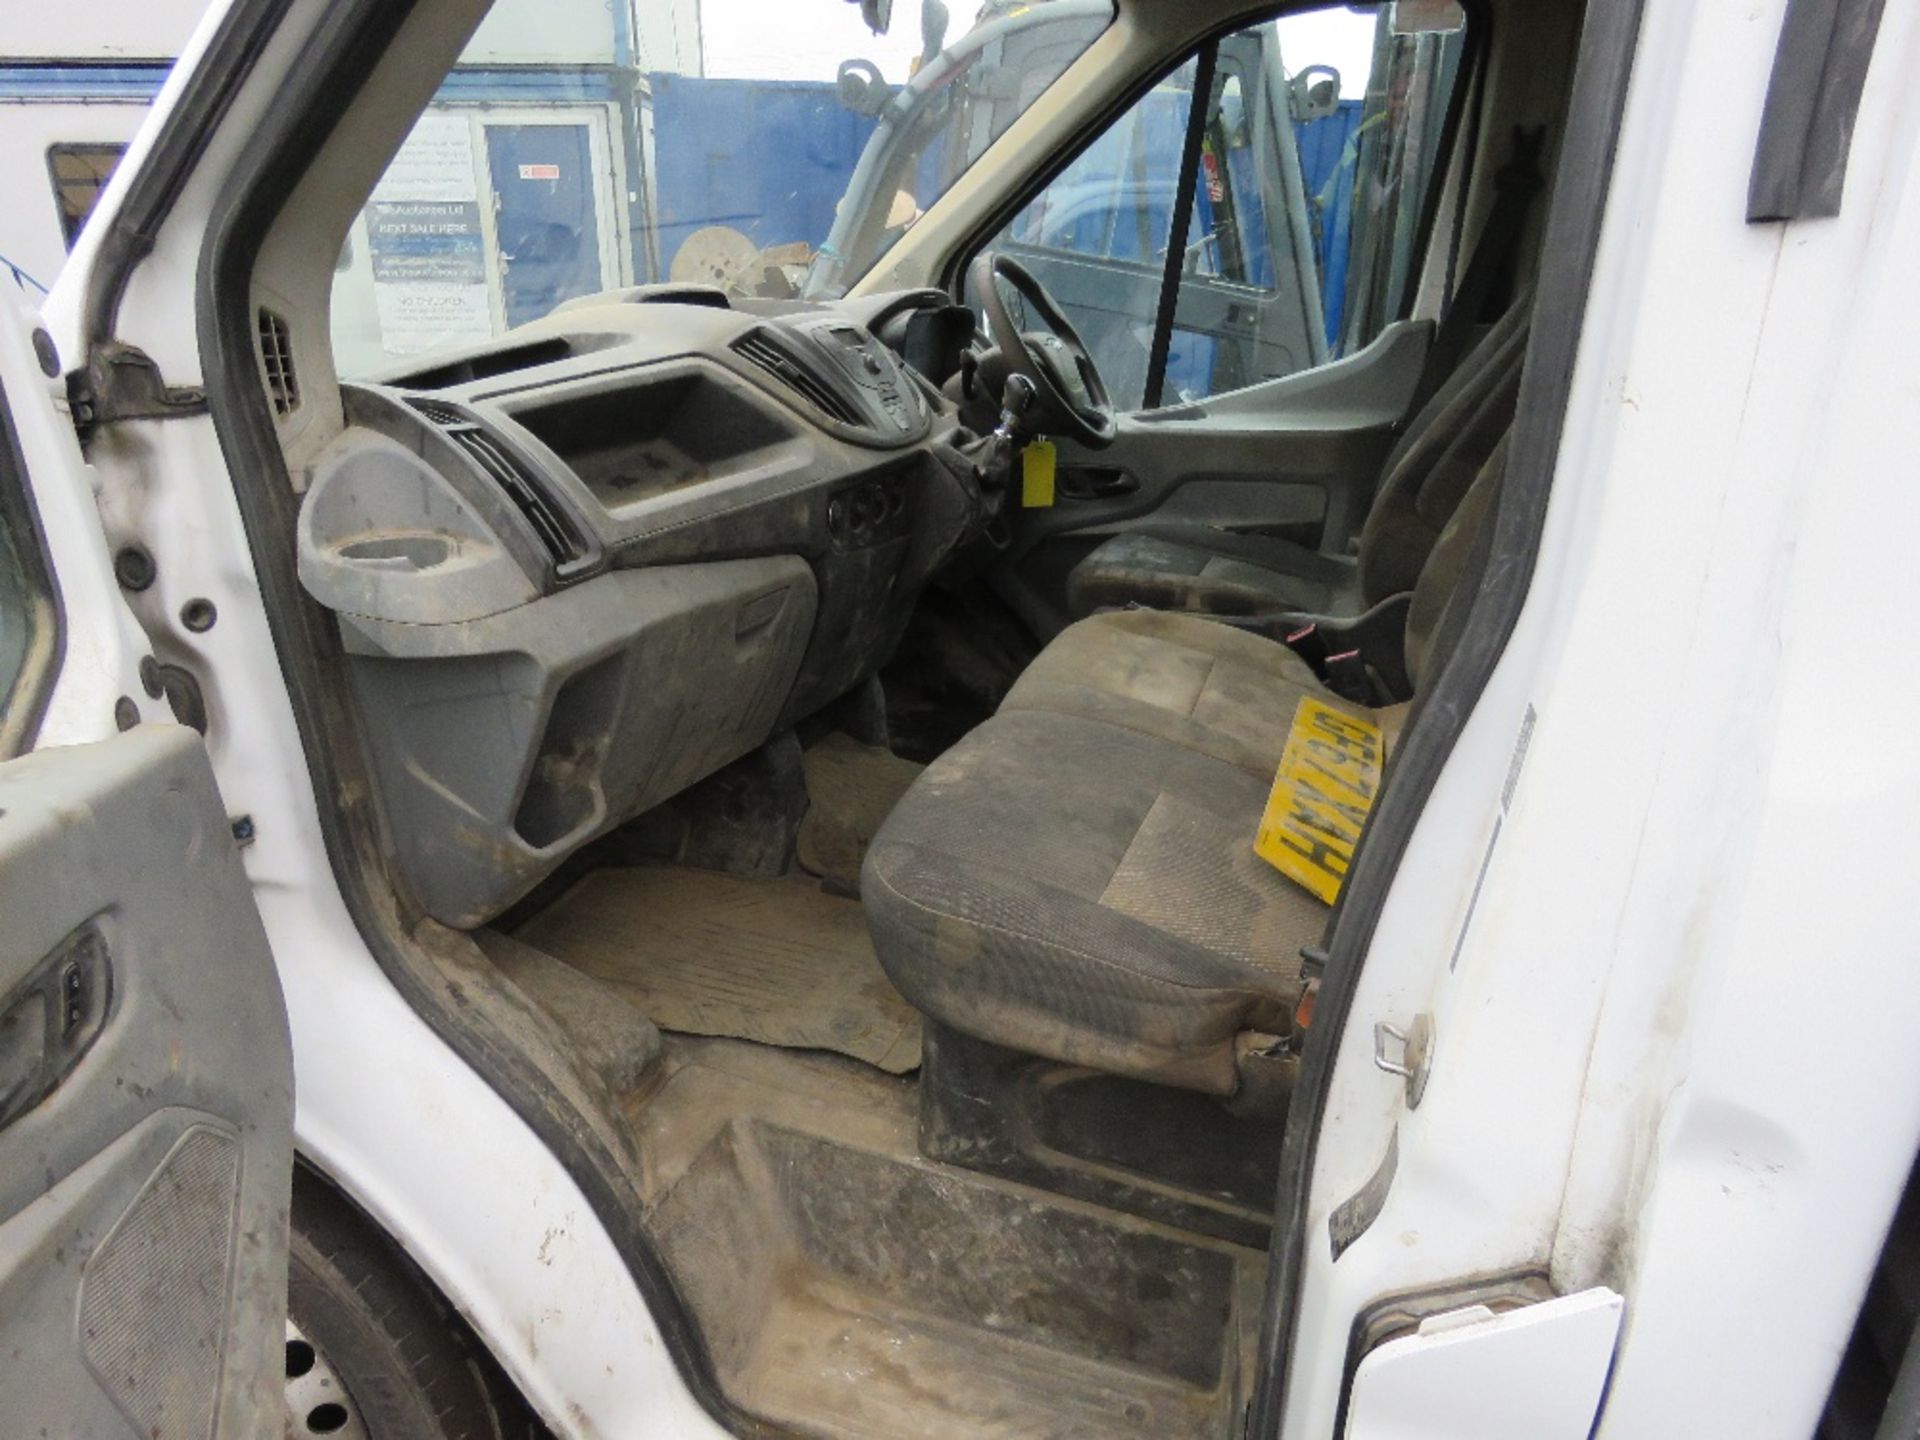 FORD TRANSIT DROP SIDE TRUCK REG:GF67 XAH. 147,016 REC MILES. WITH V5 AND MOT 17/11/24 FIRST REGIST - Image 3 of 12